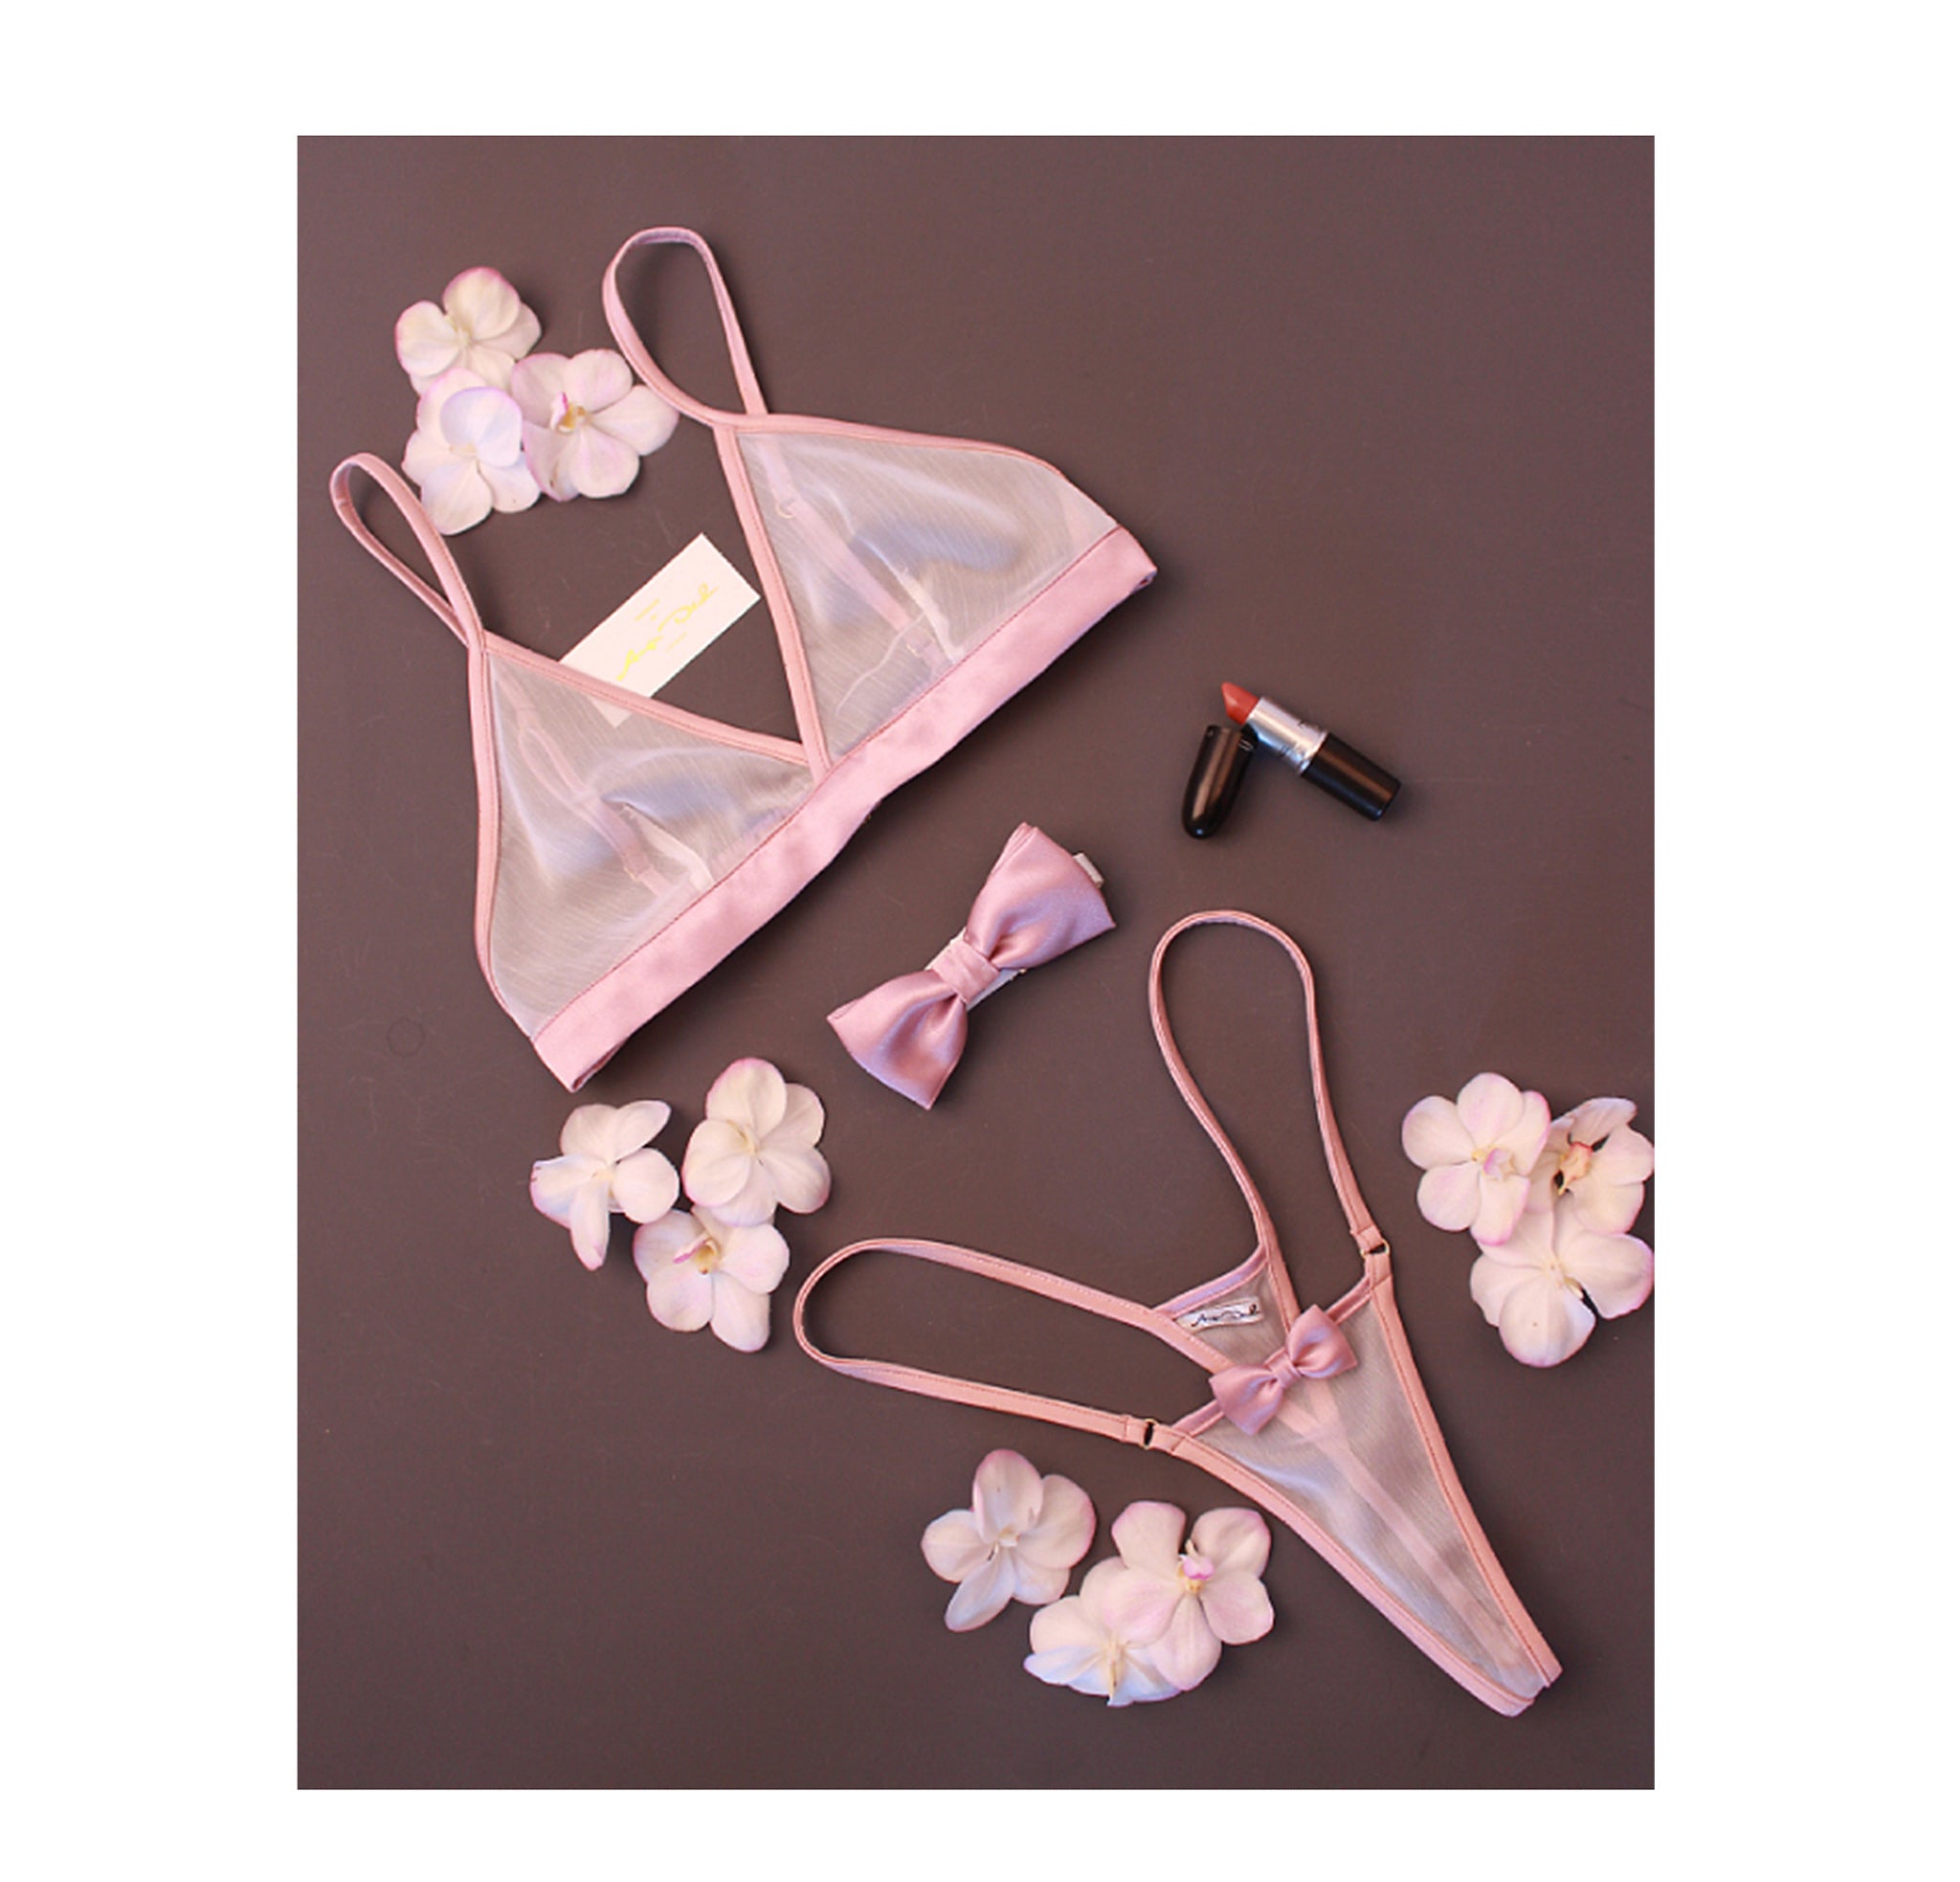 Sheer lingerie set with G string panties and bralette bra in see through white chiffon sexy boudoir lingerie - Ange Déchu